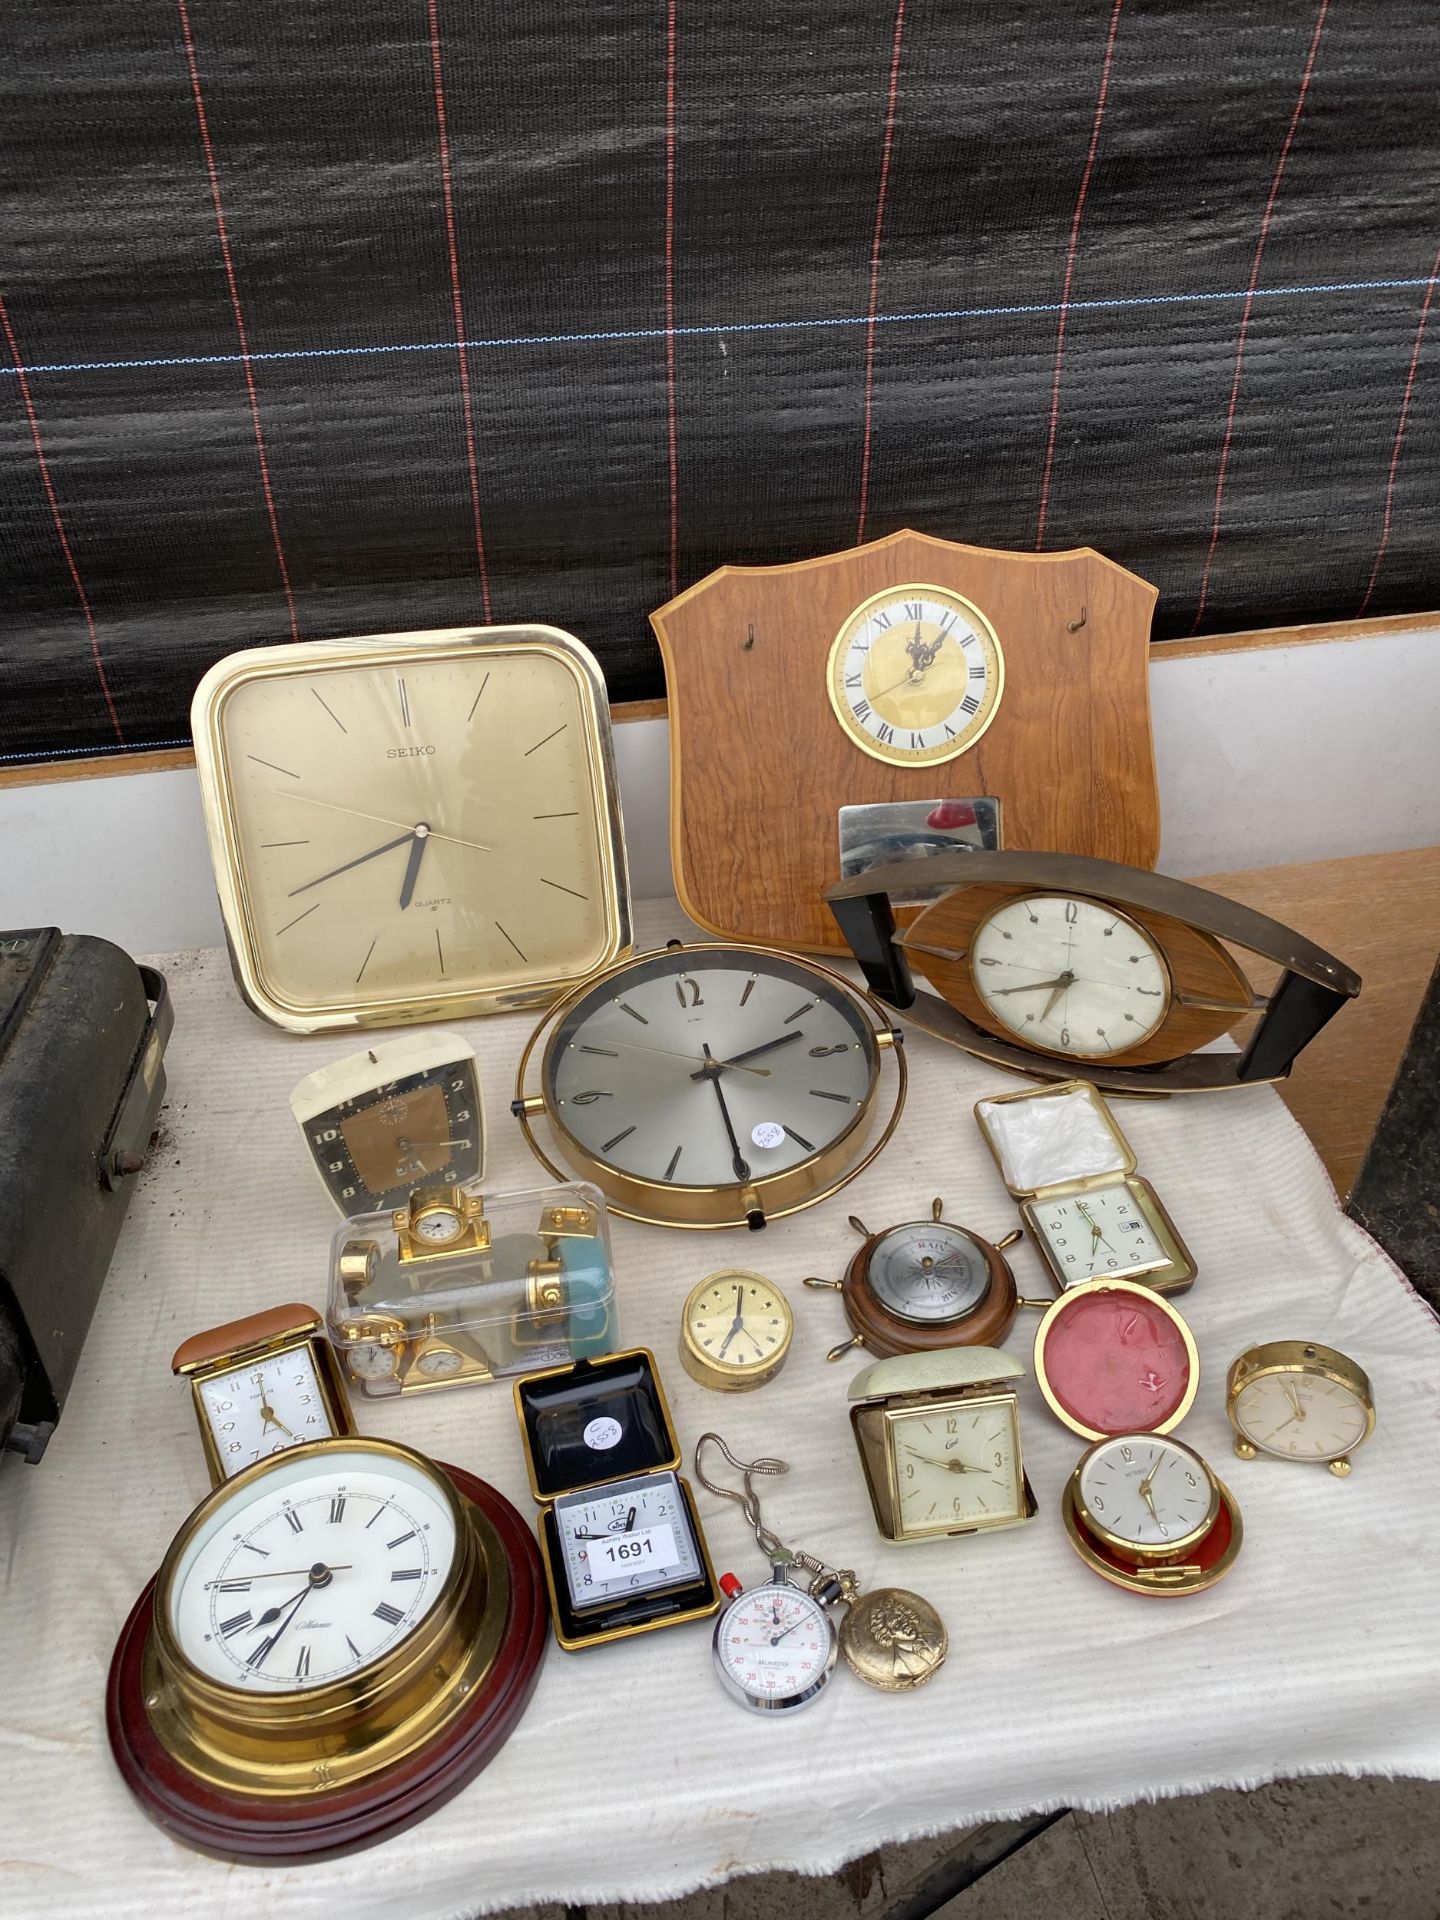 A LARGE ASSORTMENT OF CLOCKS AND WATCHES